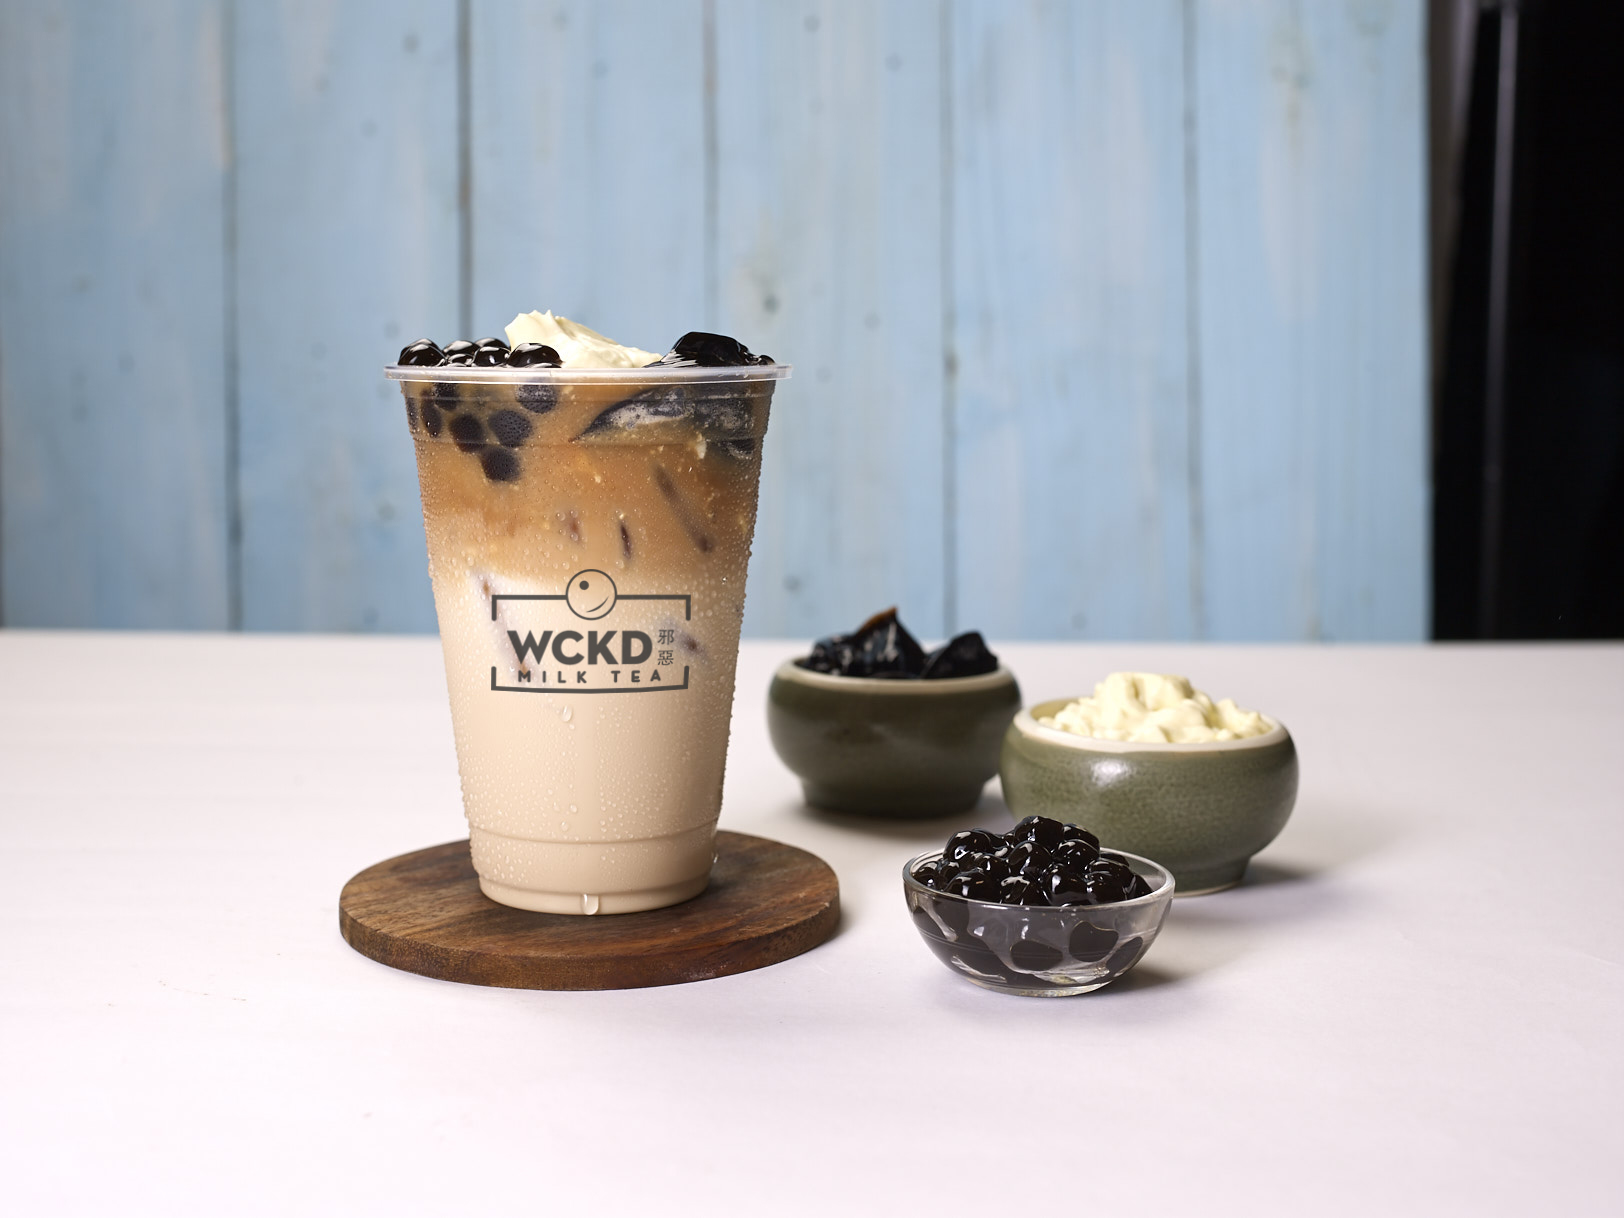 Wckd's "Ulteamate" beverage is flavored with fresh tea leaves and topped with tapioca pearls, grass jelly, and pudding